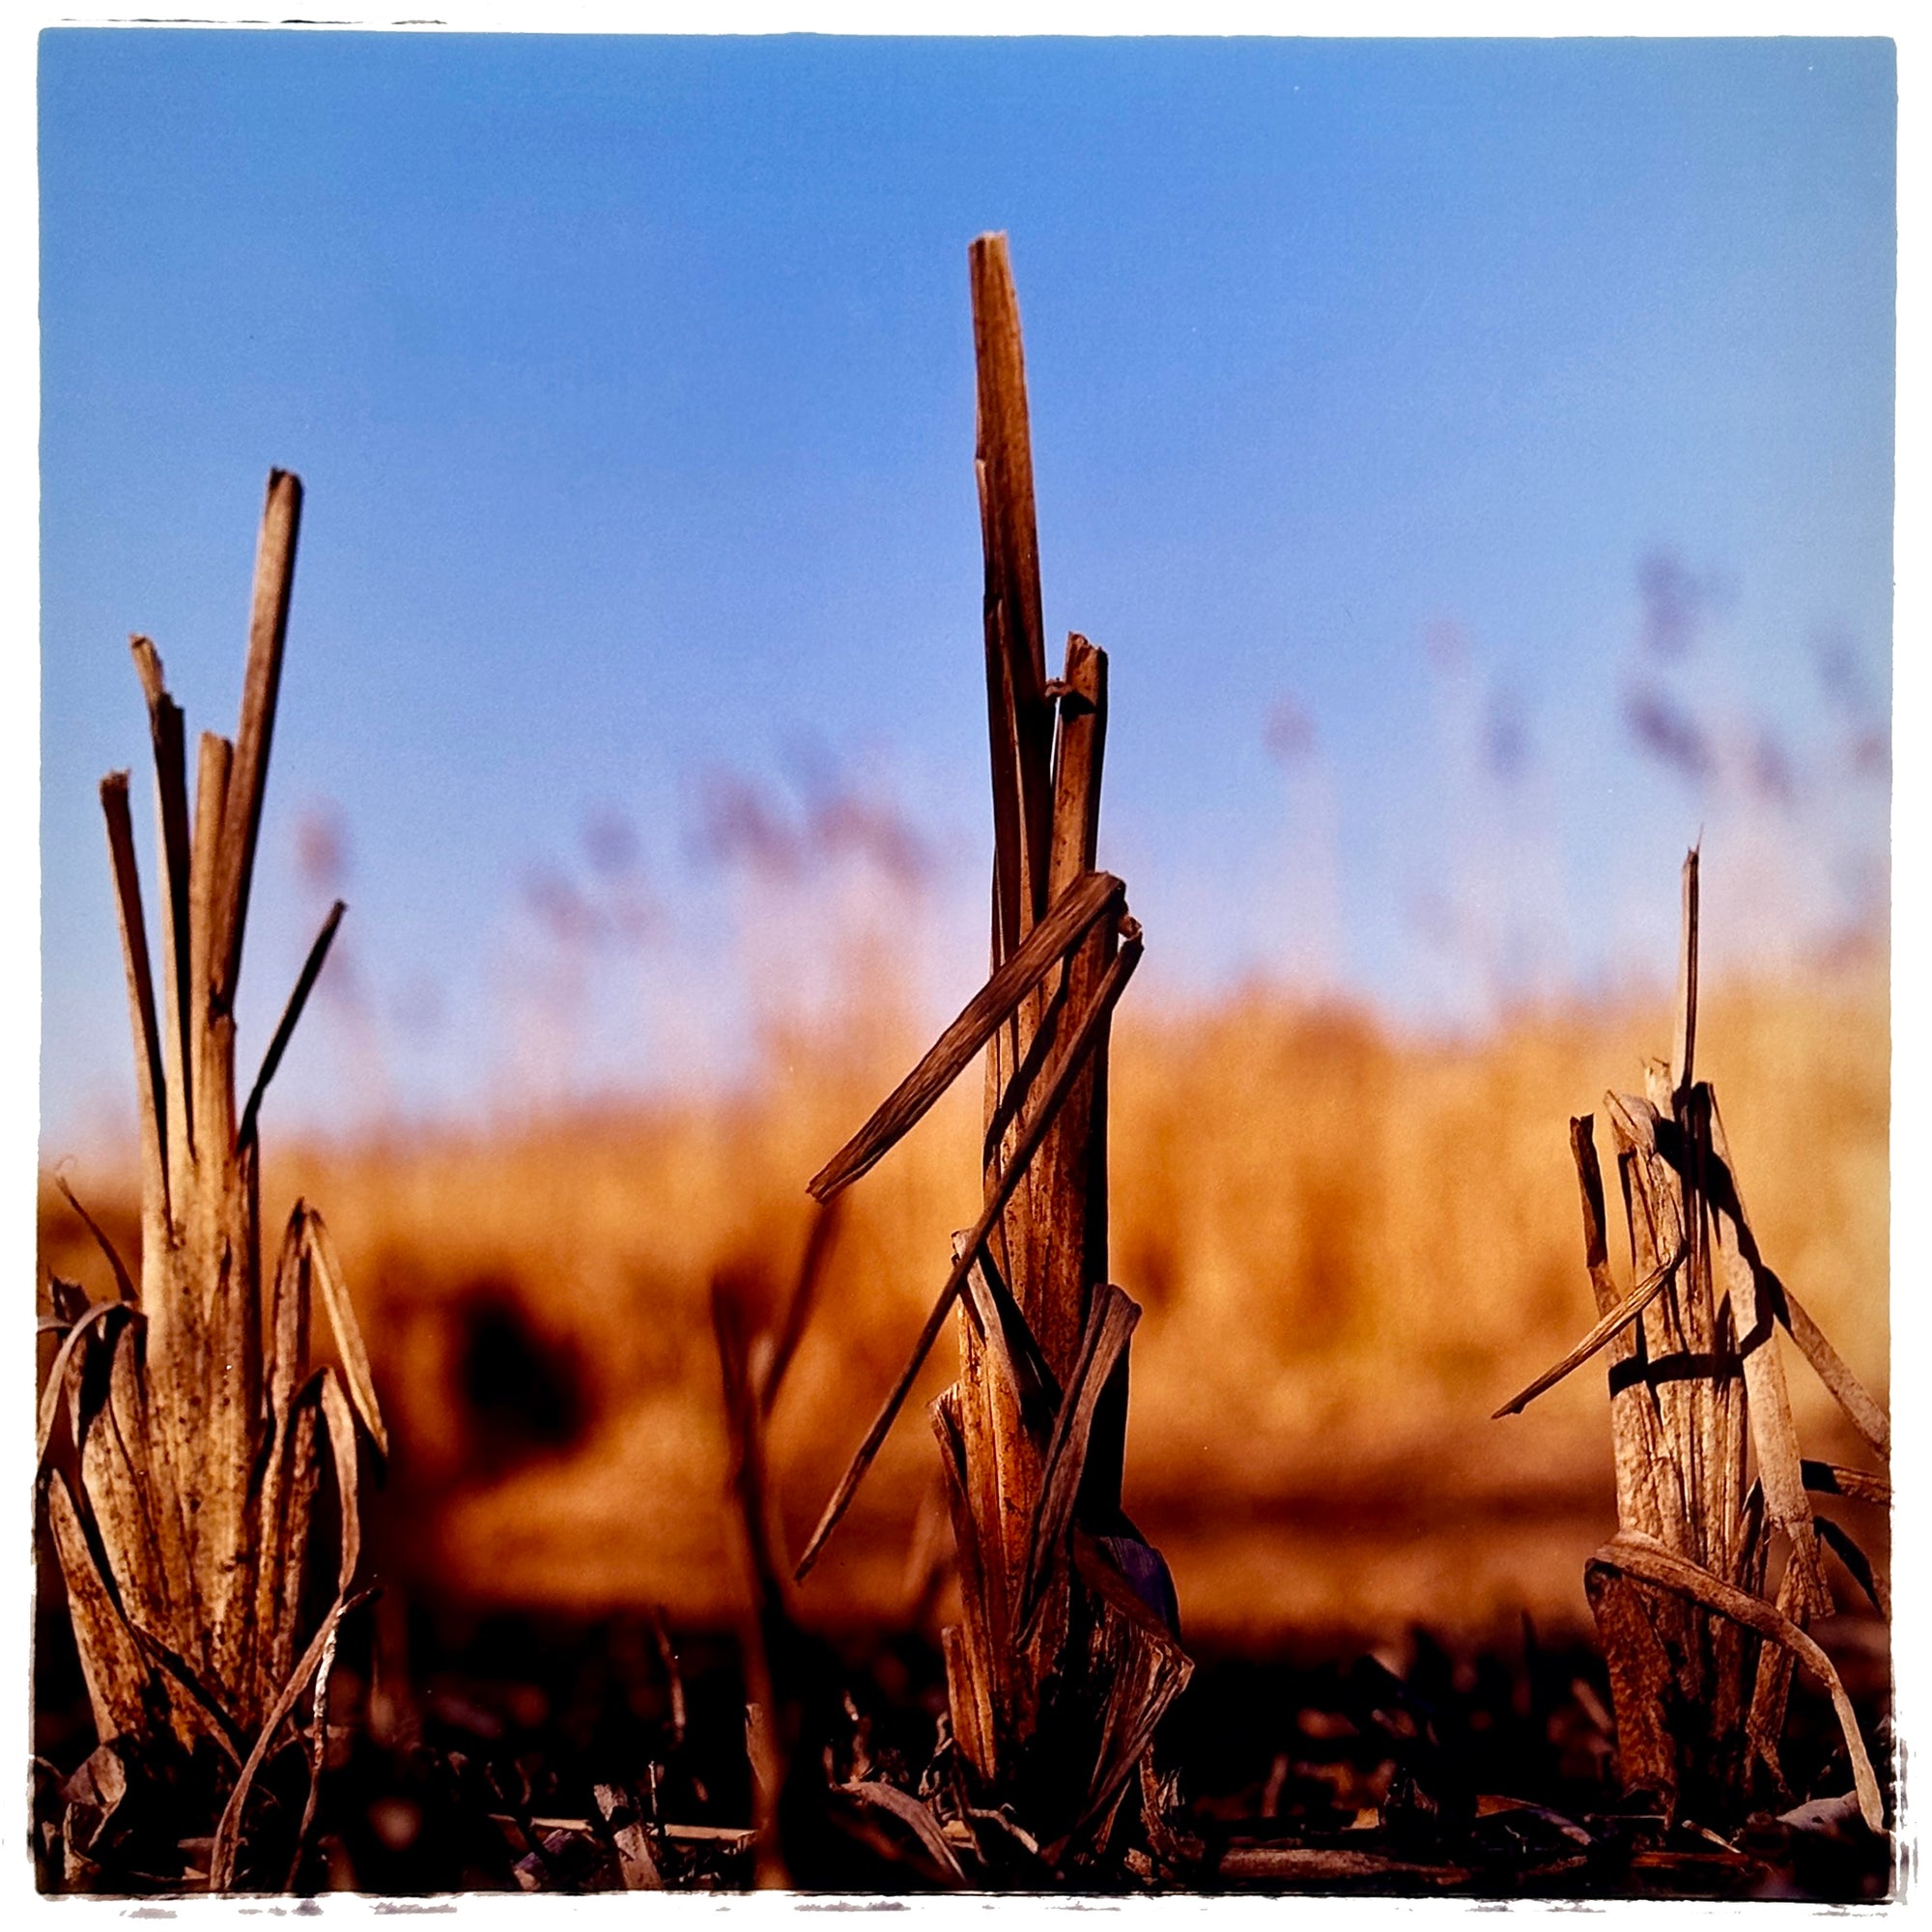 Photograph by Richard Heeps. Photograph of three distinct reed tufts sticking out of a blurred reed bed. A summer blue sky is also blurred behind and the image is bathed in summer sun.